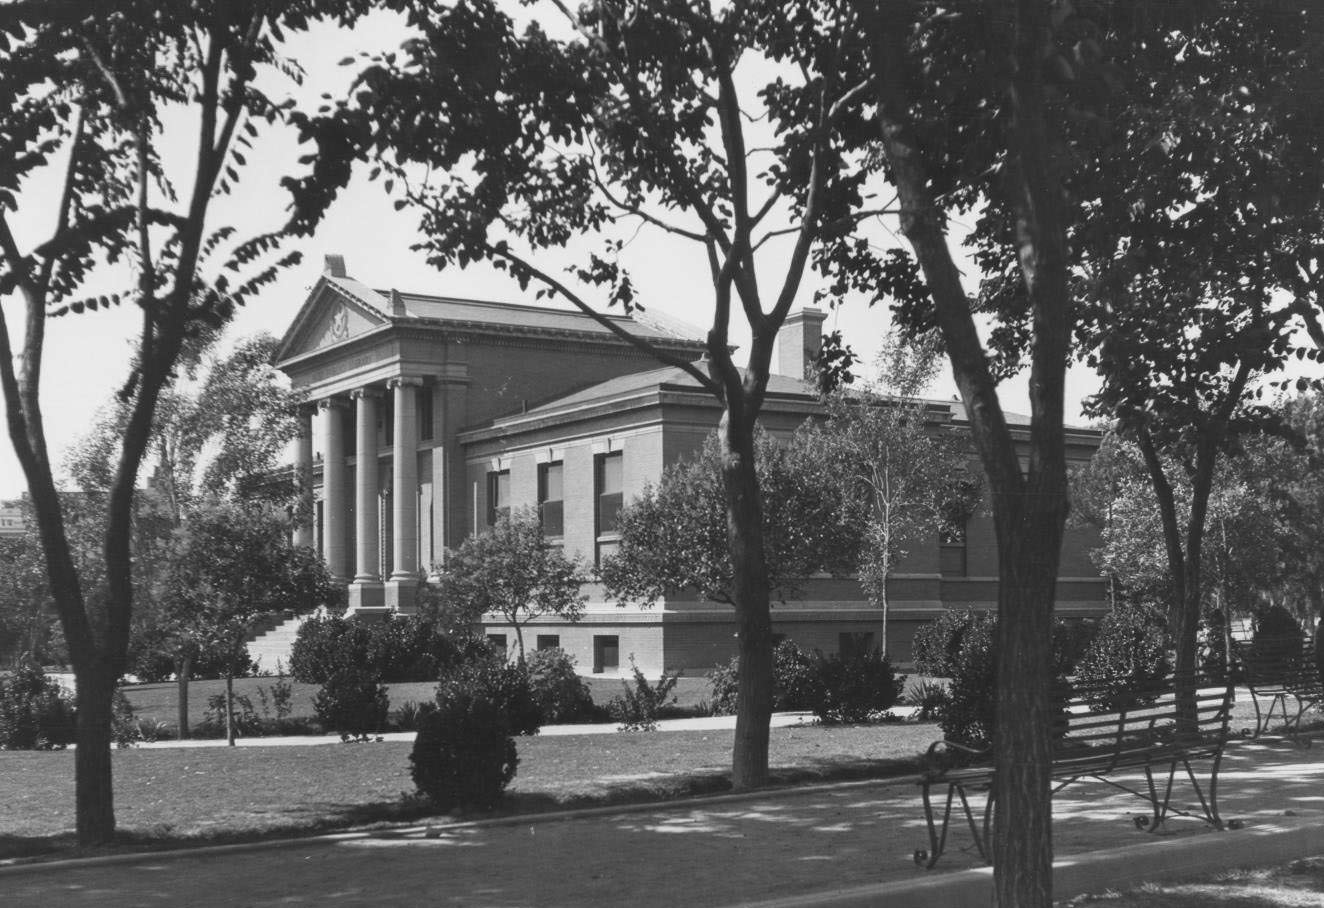 The front and right side of the Carnegie Library in El Paso, 1904. The building has four large ionic columns with a star engraving above them. Trees and bushes can be seen on the landscaping.